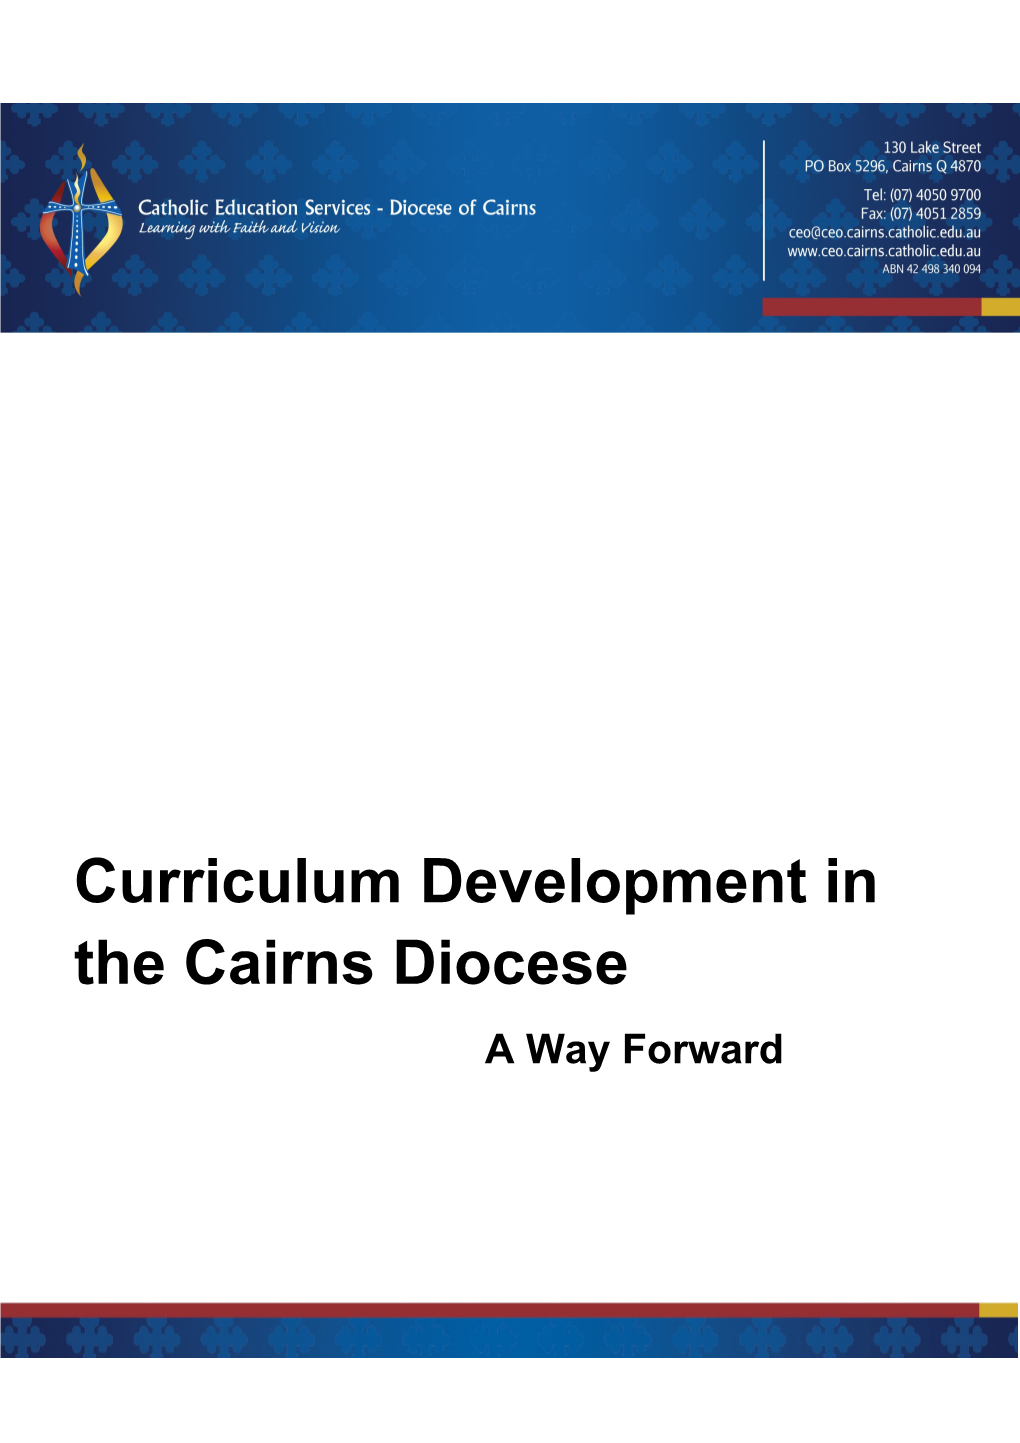 Curriculum Development in the Cairns Diocese